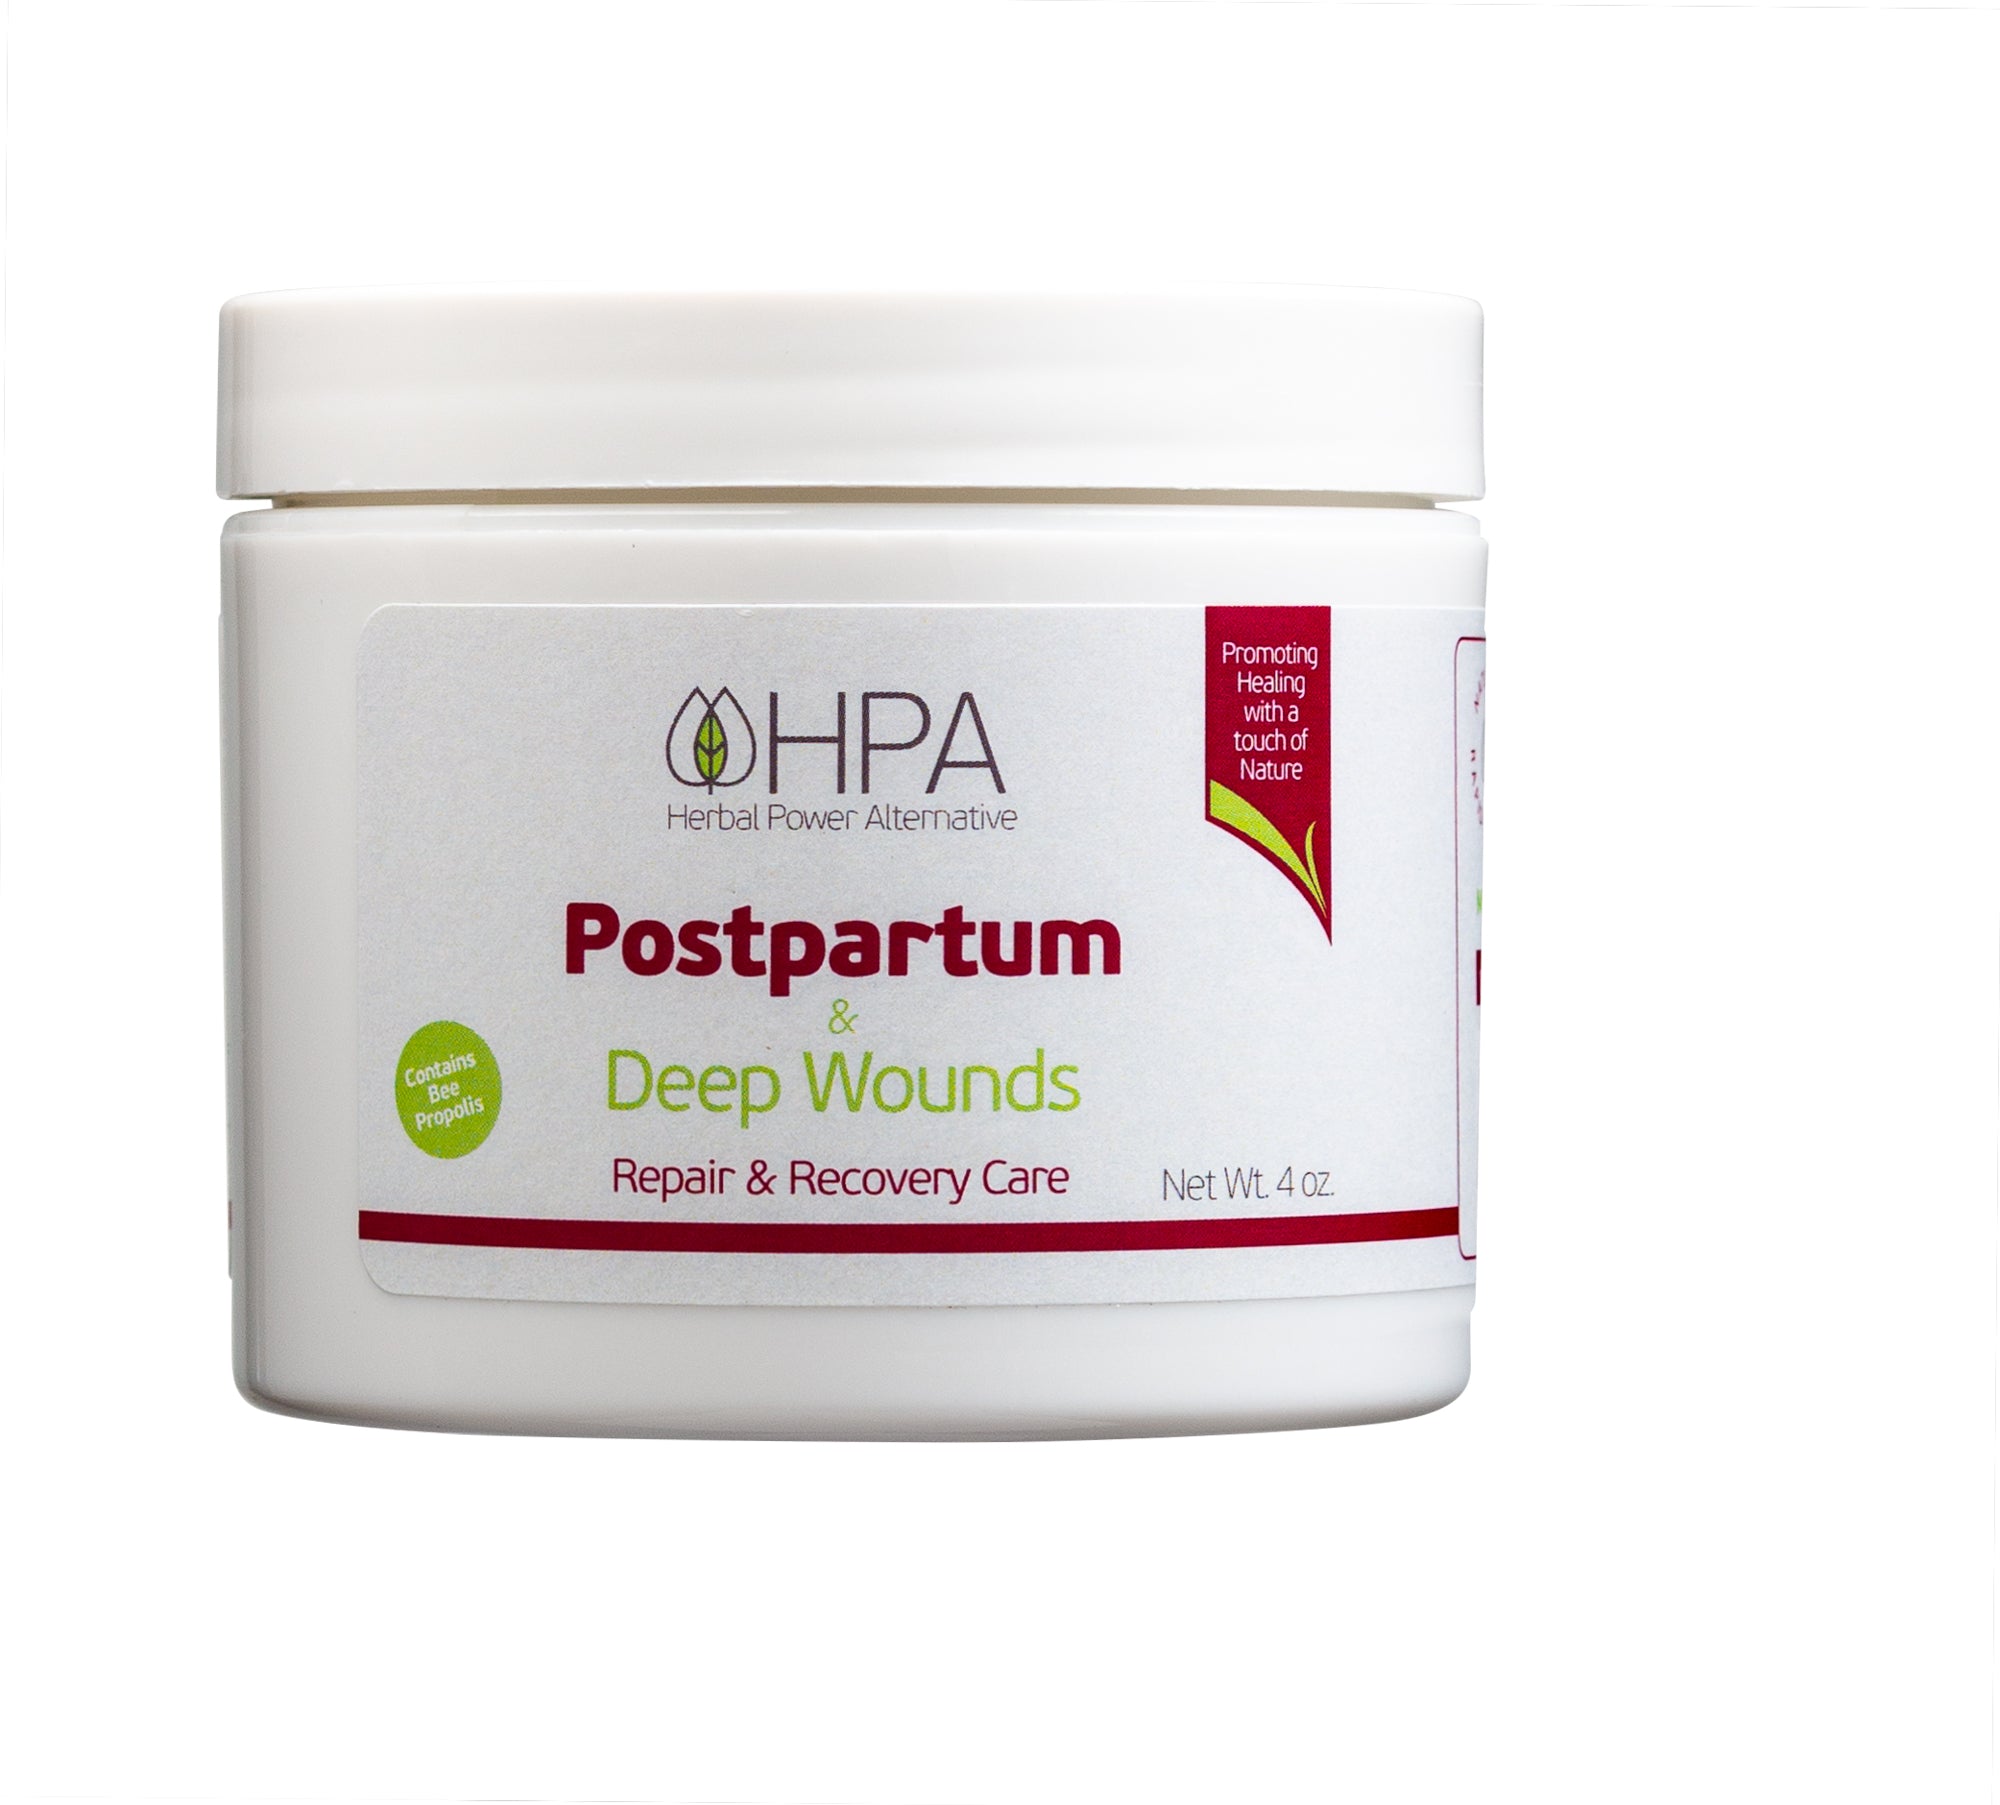 Postpartum & Deep wounds Repair and Recovery care